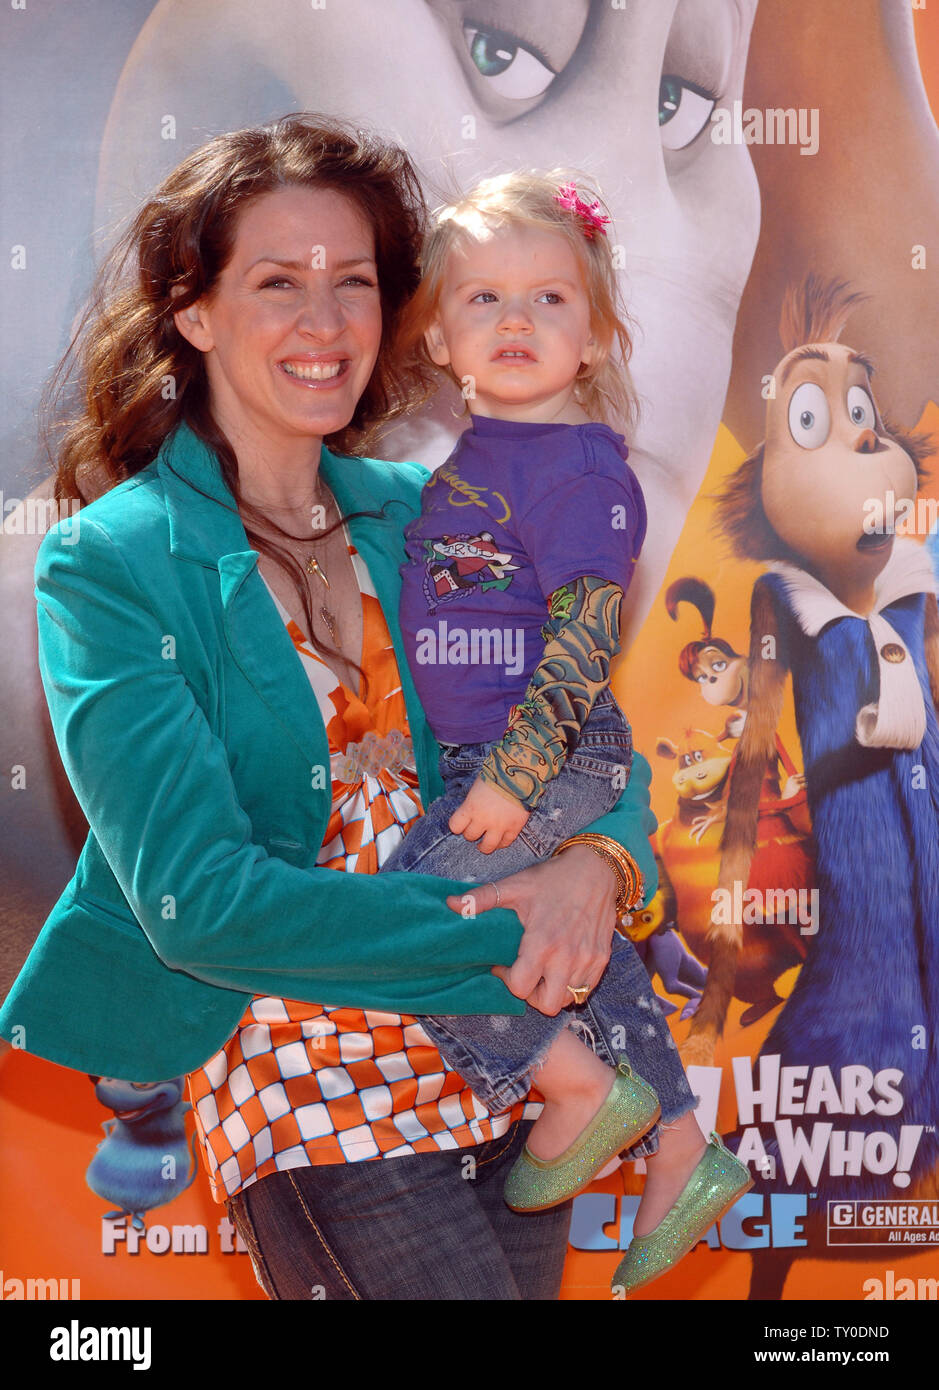 Actress Joely Fisher attends the premiere of the animated motion picture 'Horton Hears a Who!' with her daughter True in Los Angeles on March 8, 2008  (UPI Photo/Jim Ruymen) Stock Photo